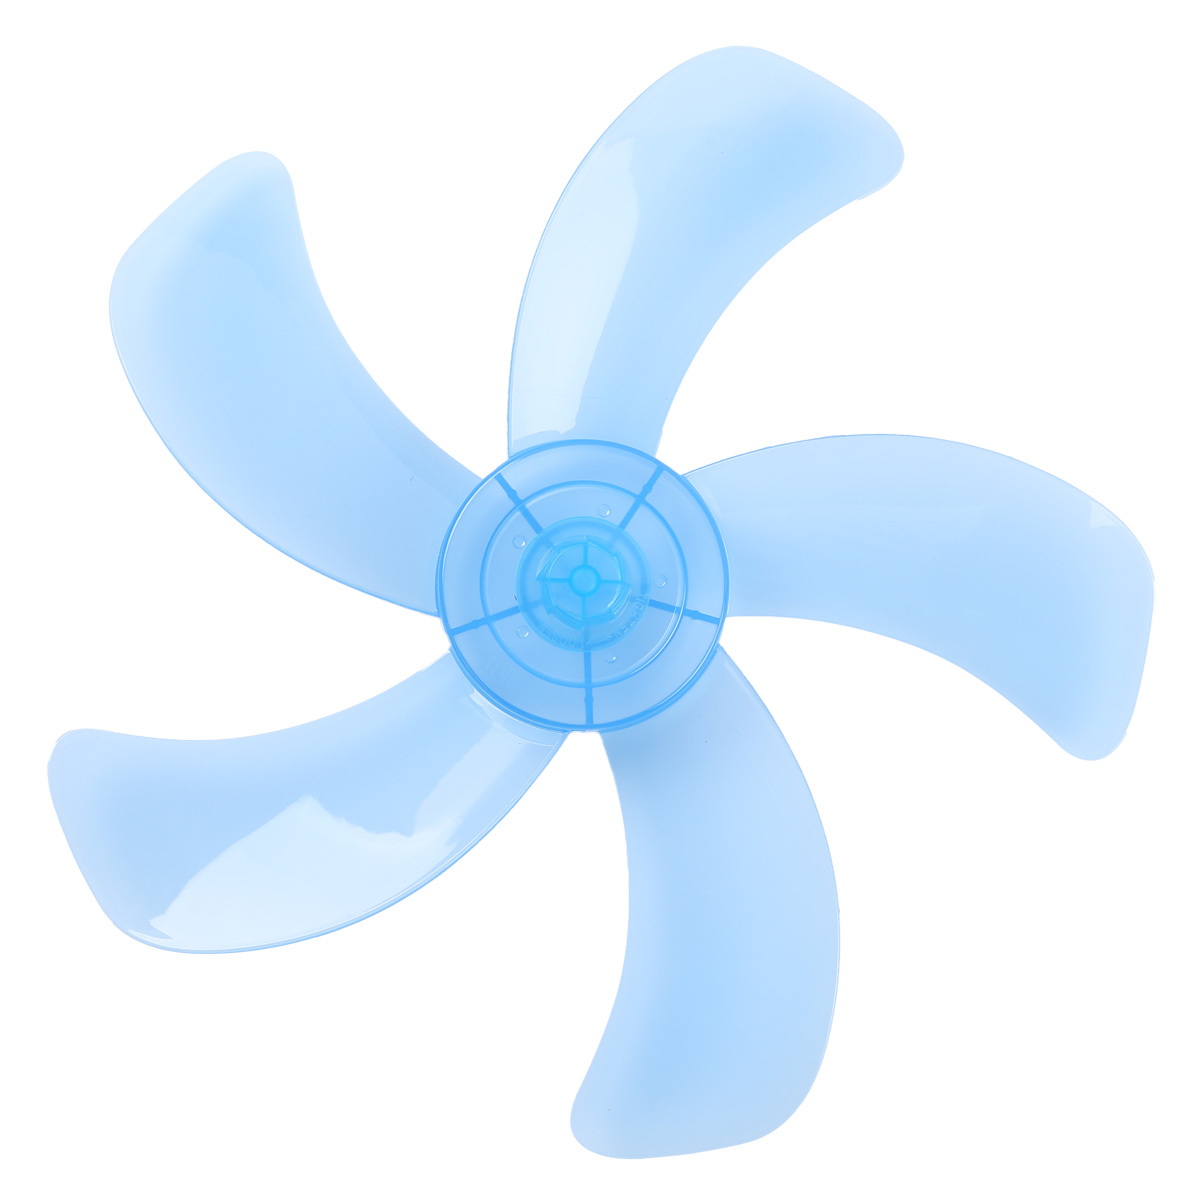 Household Plastic Fan Blade Universal 12/16 inch Three/Five Leaves Nut Cover Blades Low Noise Ventilation Parts for Table Fanner